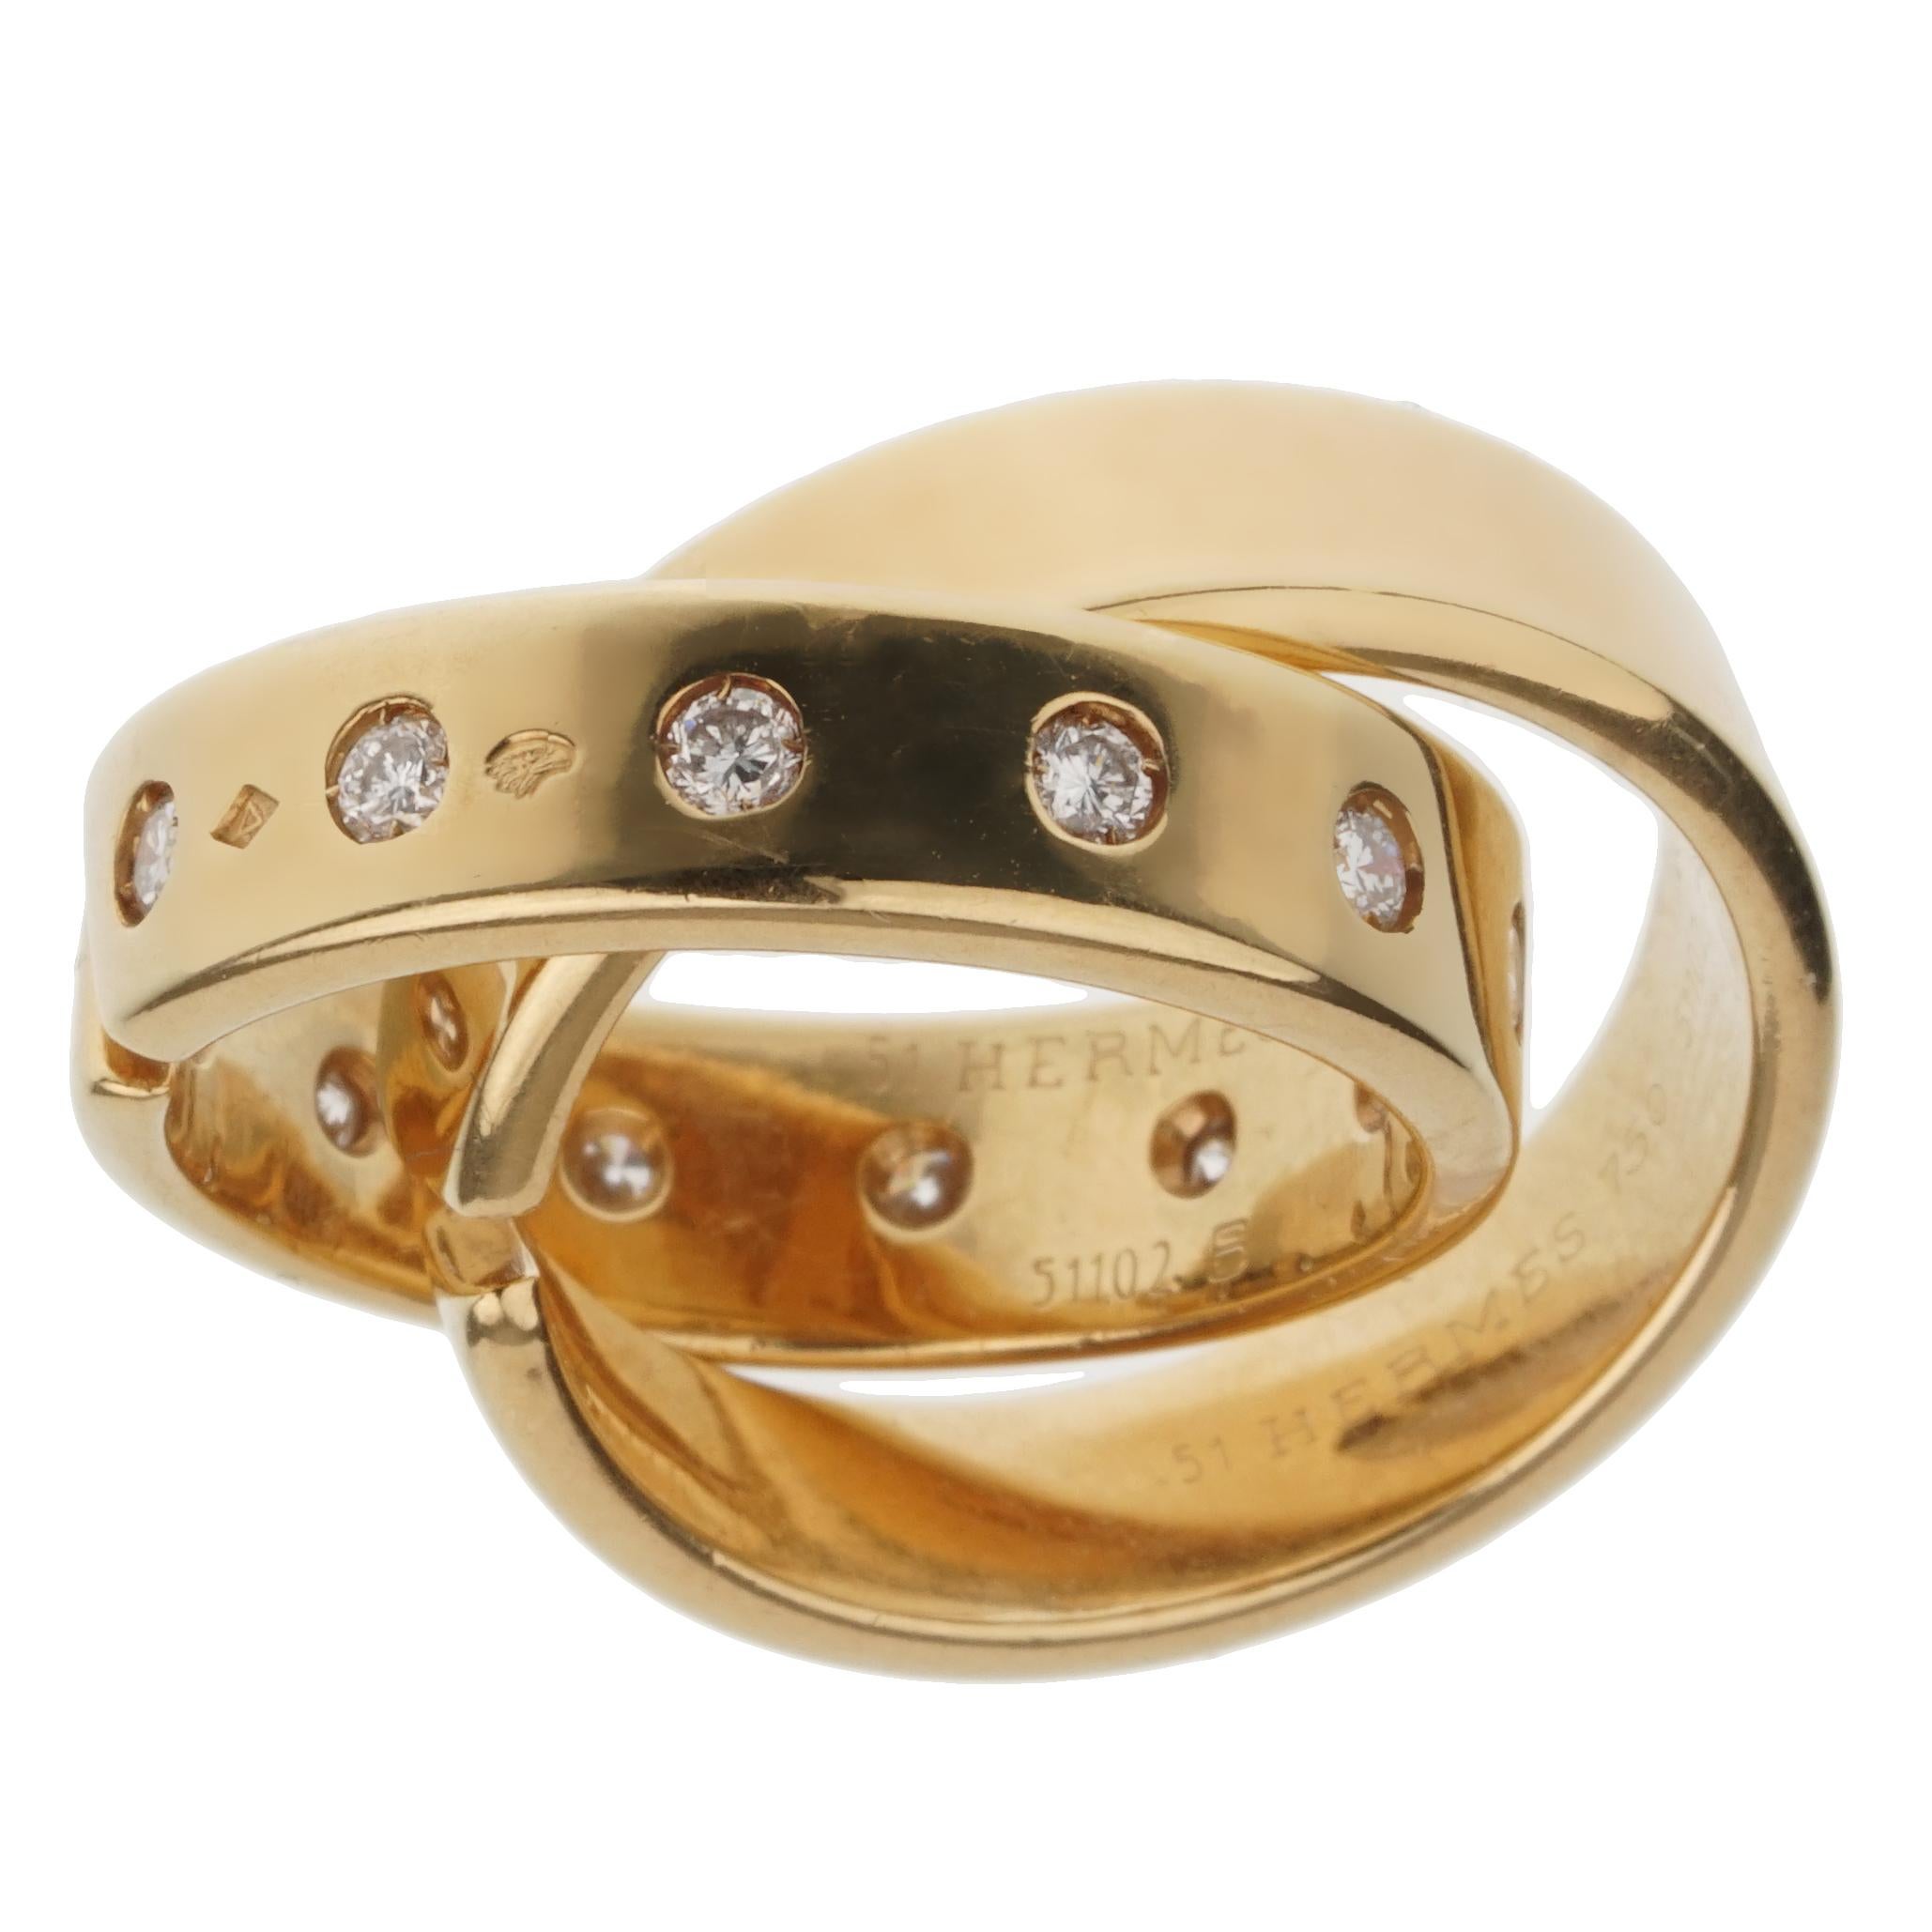 Hermes Paris Diamond Yellow Gold Rolling Ring Bands In Excellent Condition For Sale In Feasterville, PA